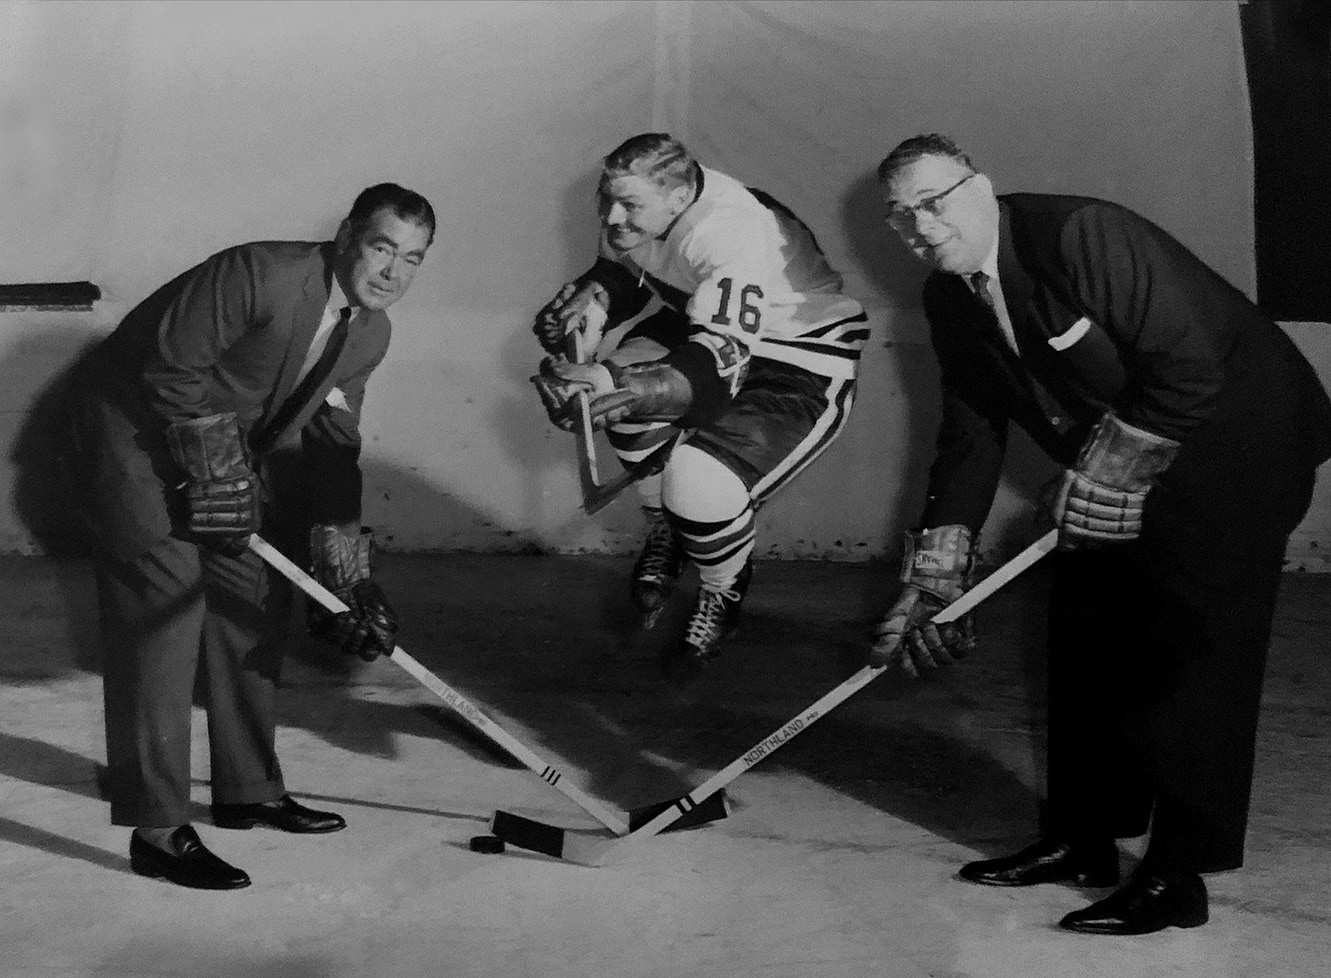  Arthur ( right ) with partner Jimmy Norris. In between them, superstar player Bobby Hull clowns around in his original number 16 jersey from his first few years with the Blackhawks (1957 to 1961). Hull later switched to number 7 and again to the now